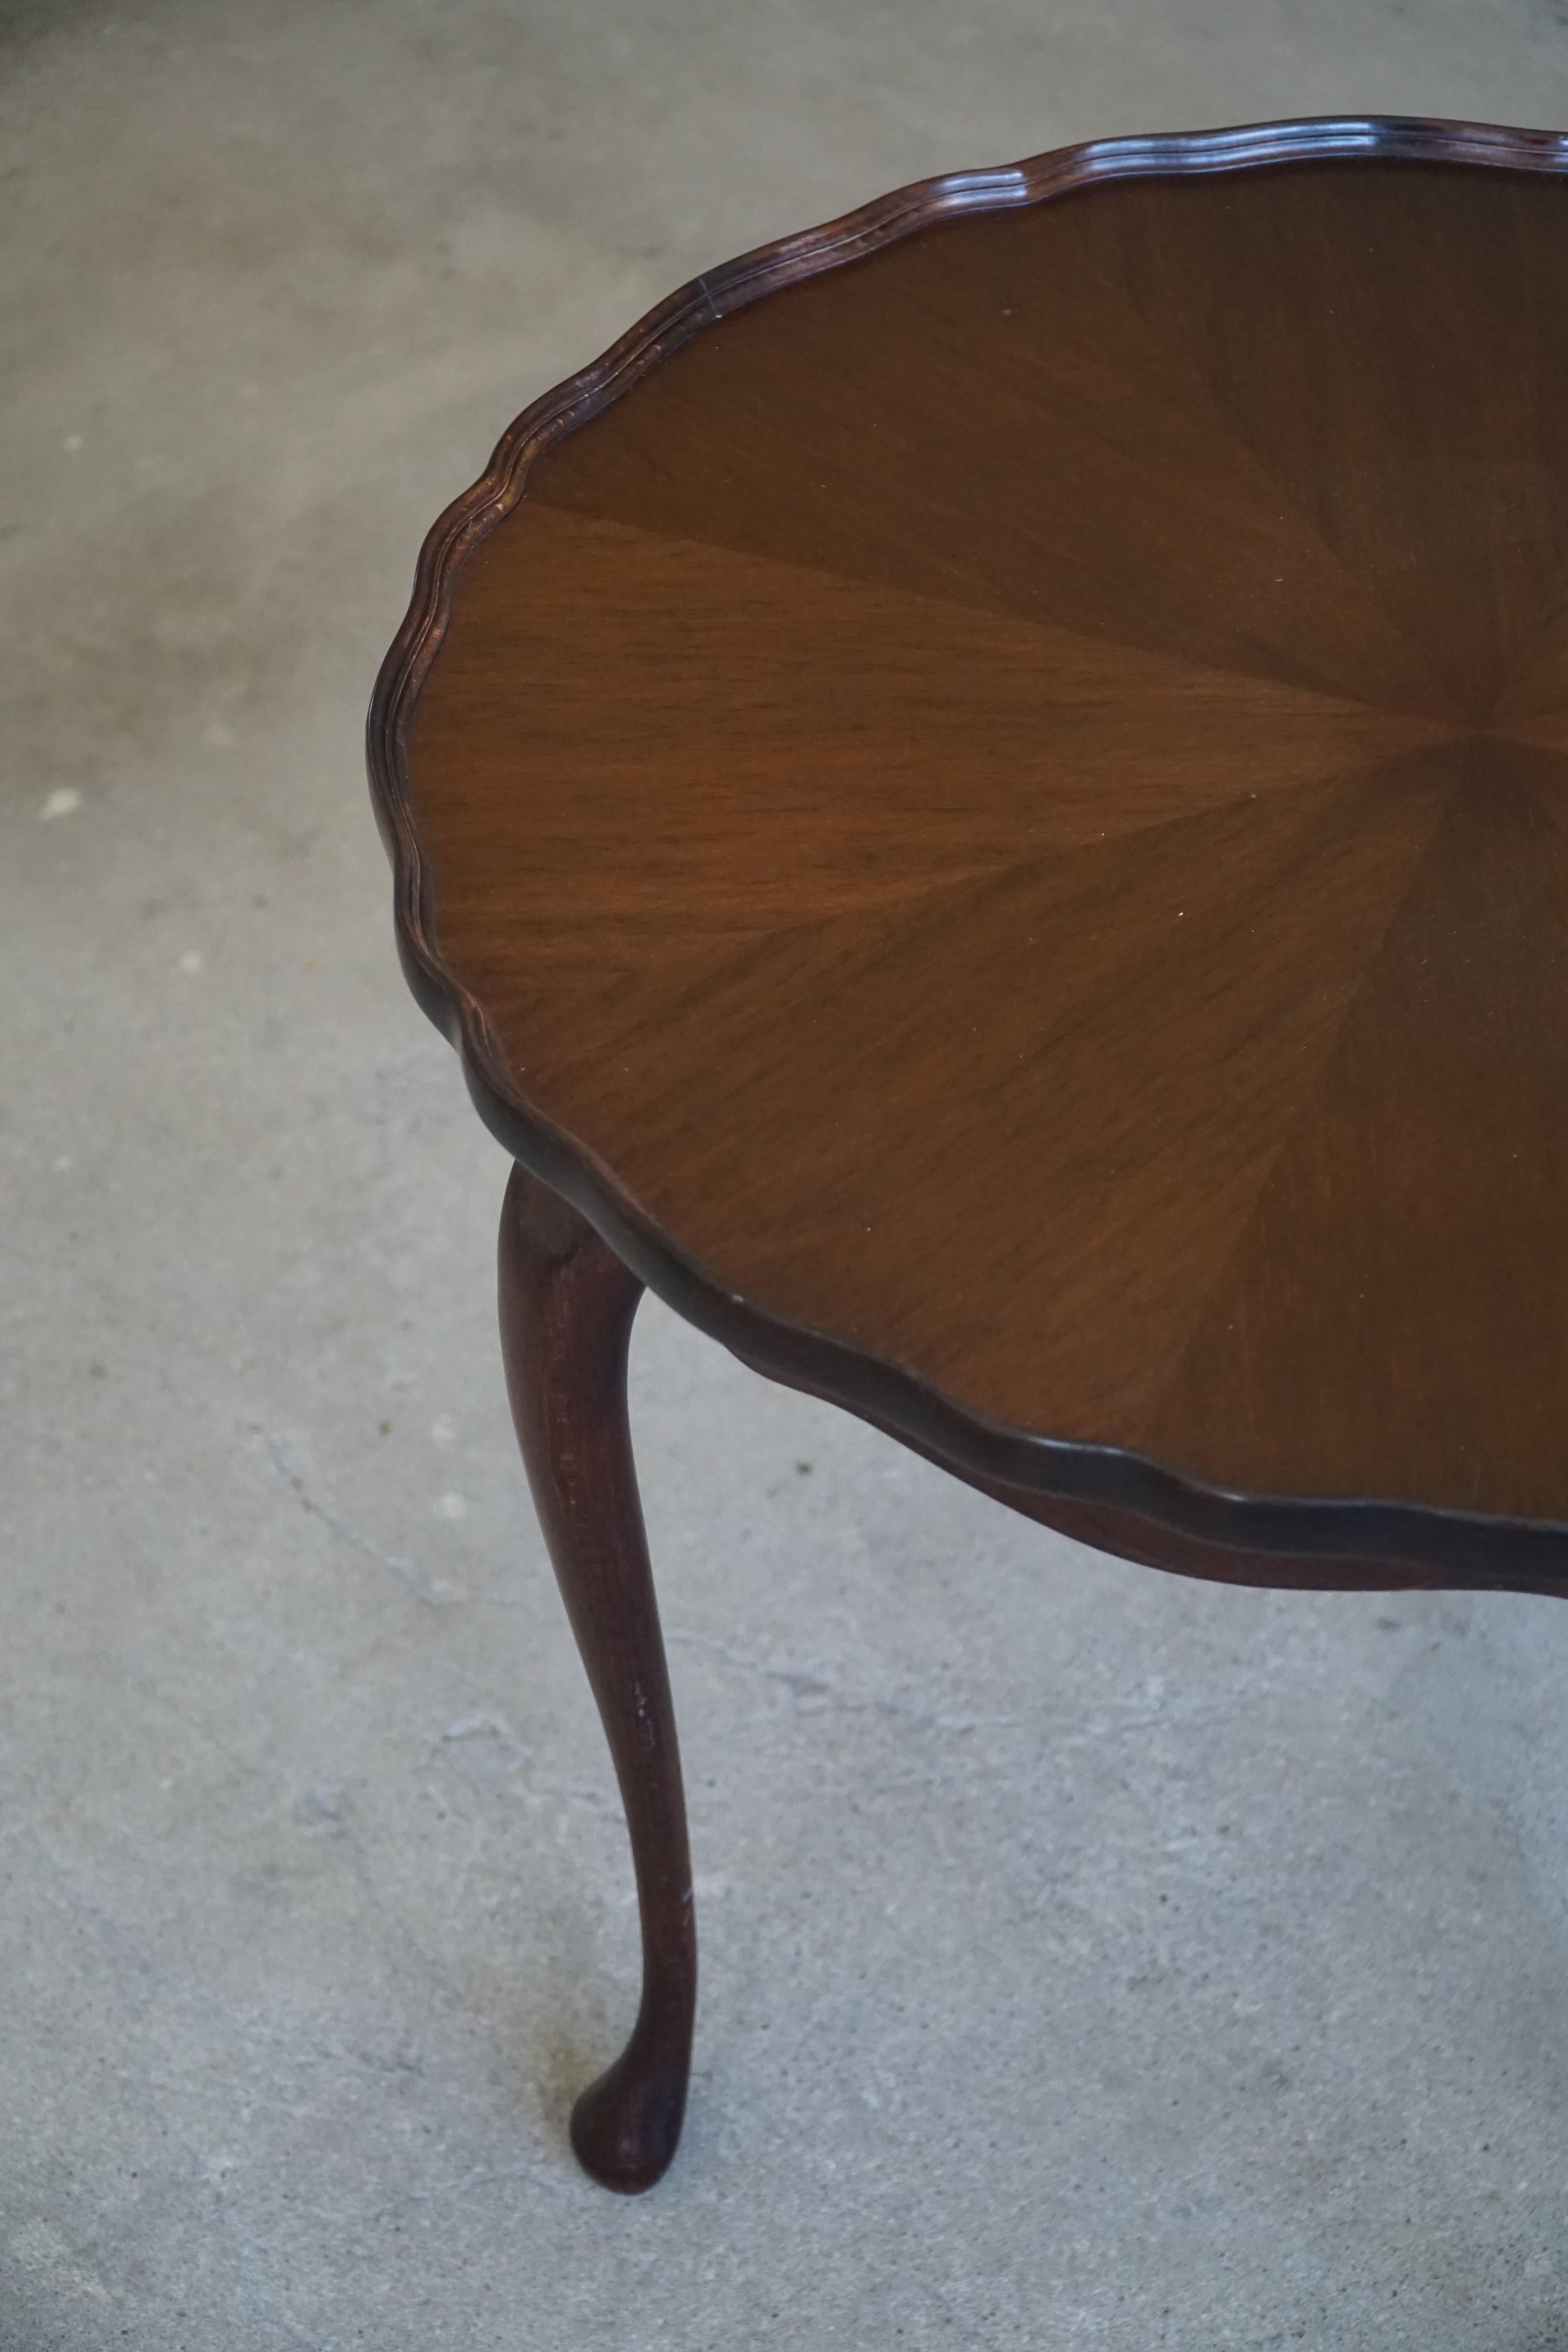 Danish Art Deco Side Table / Coffee Table in Stained Beech, 1940s For Sale 5